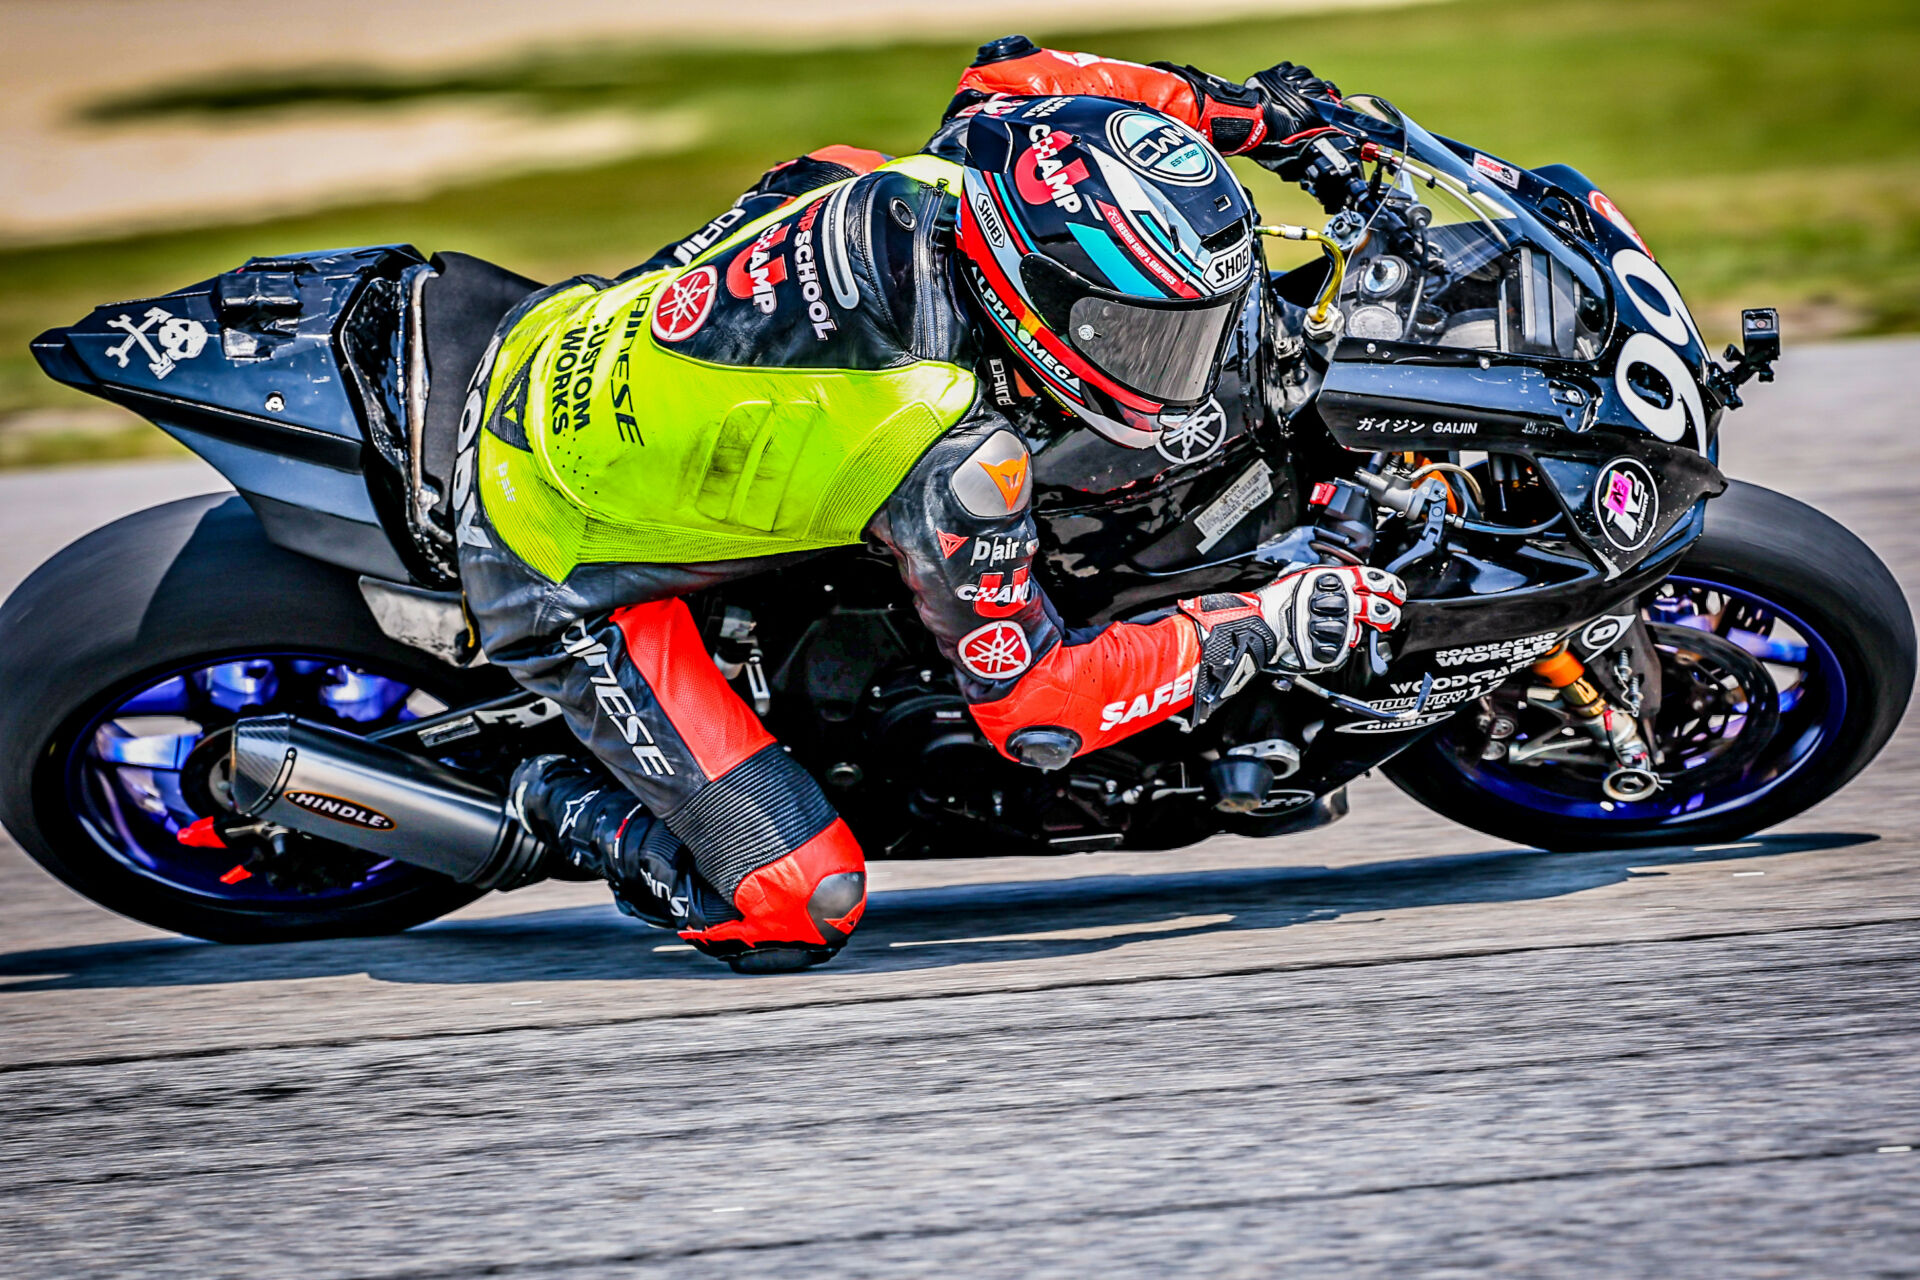 Cody Wyman (99) on the Army of Darkness Yamaha YZF-R1. Photo by Apex Pro Photography, courtesy N2 Racing.